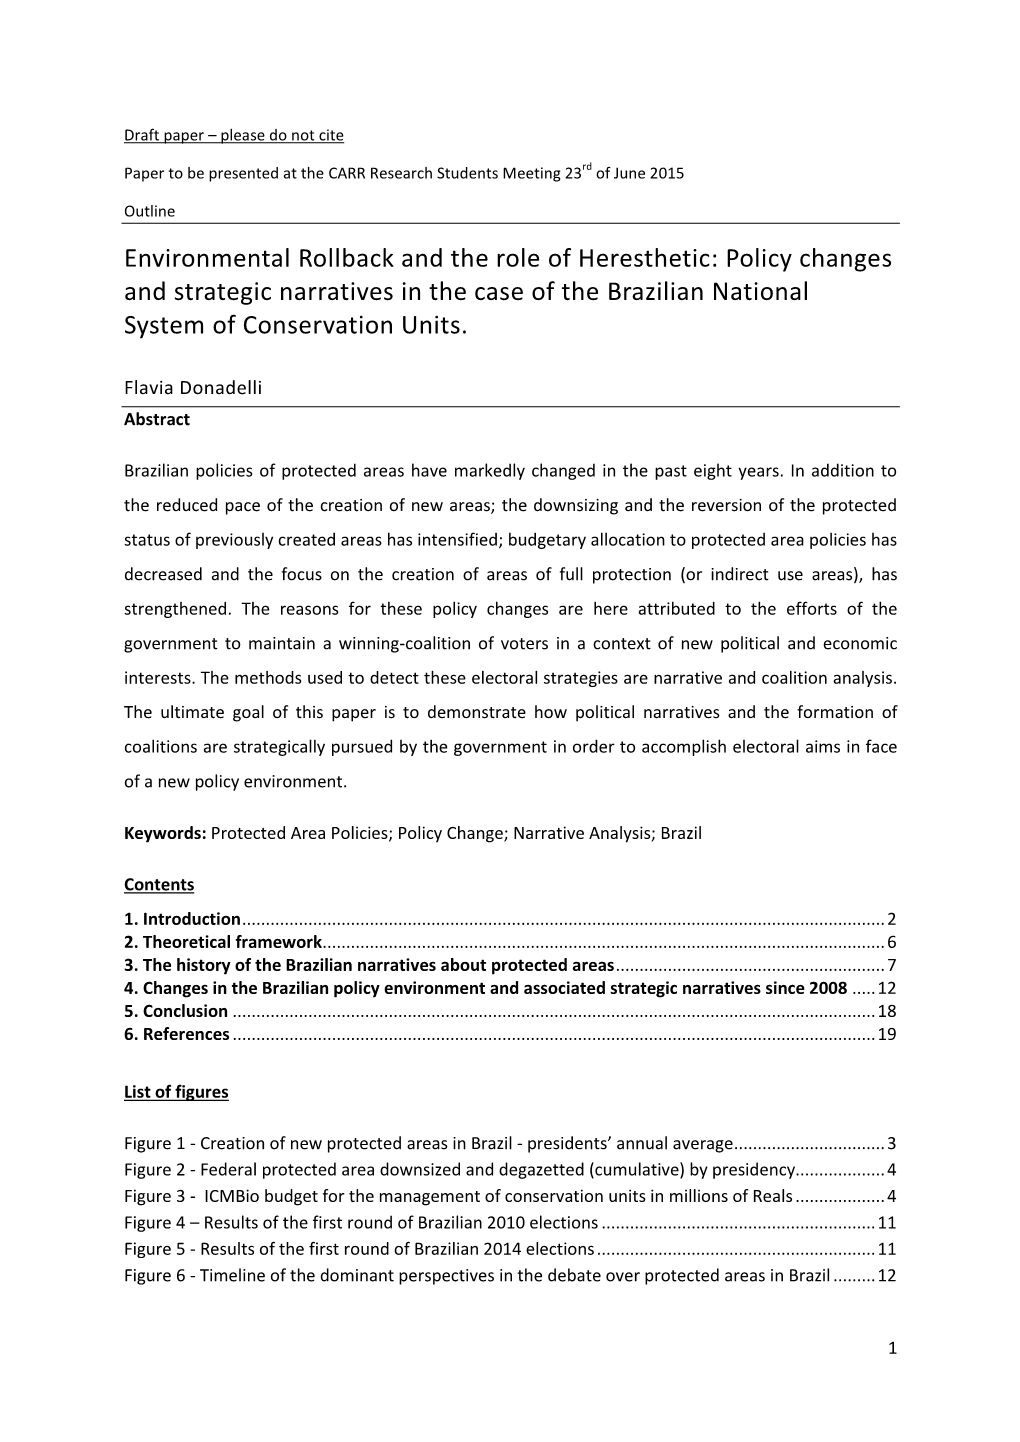 Environmental Rollback and the Role of Heresthetic: Policy Changes and Strategic Narratives in the Case of the Brazilian National System of Conservation Units